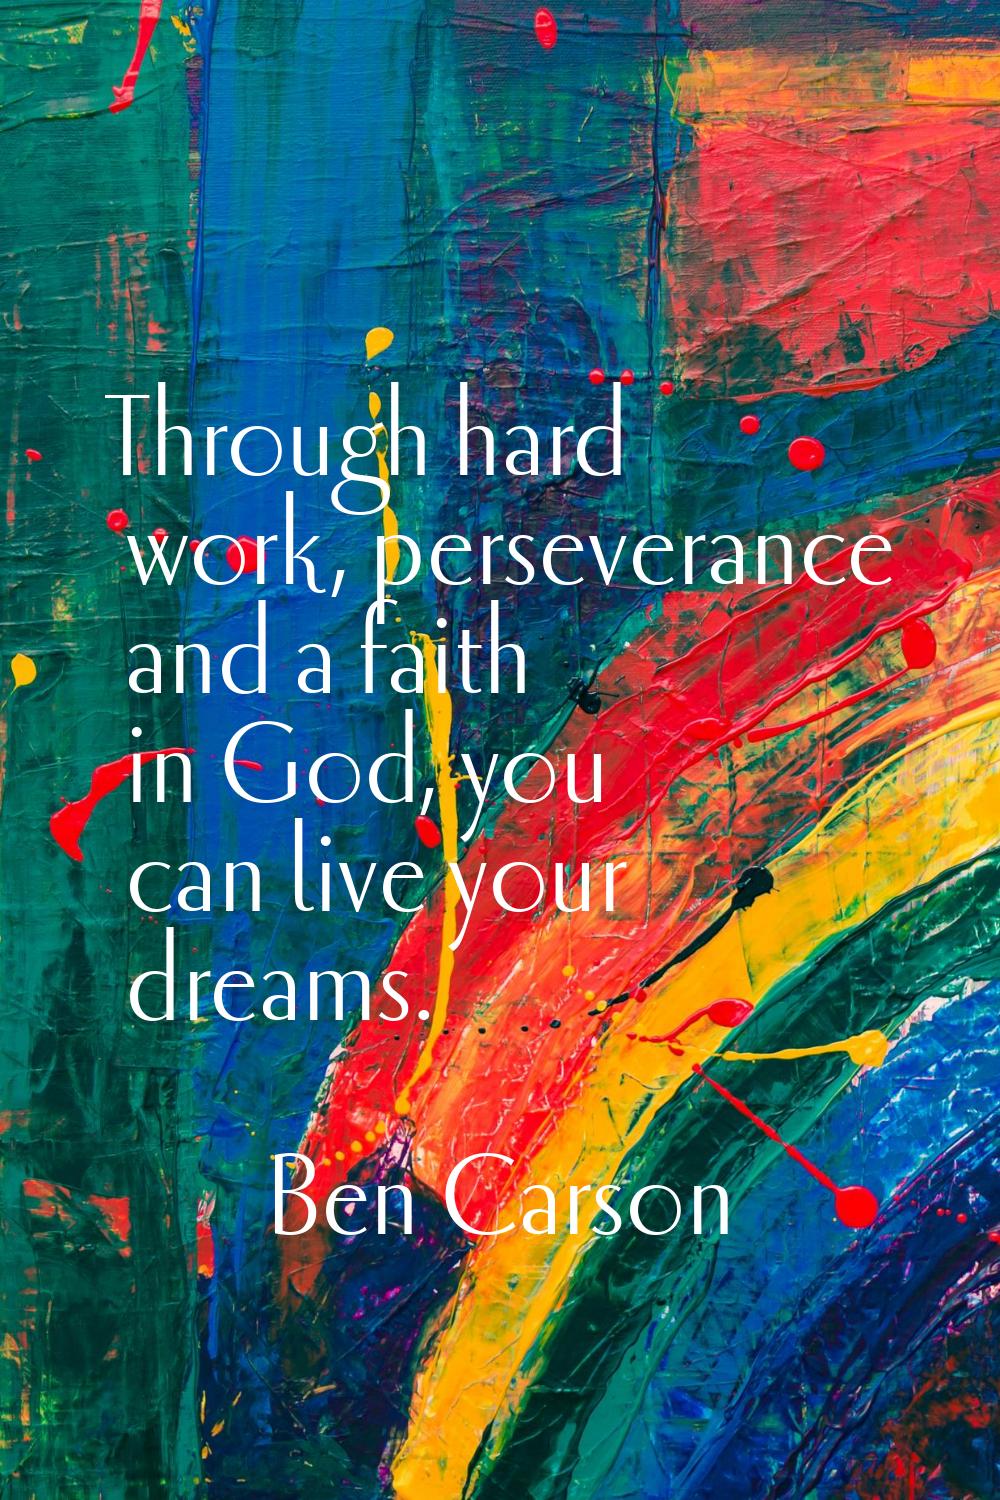 Through hard work, perseverance and a faith in God, you can live your dreams.